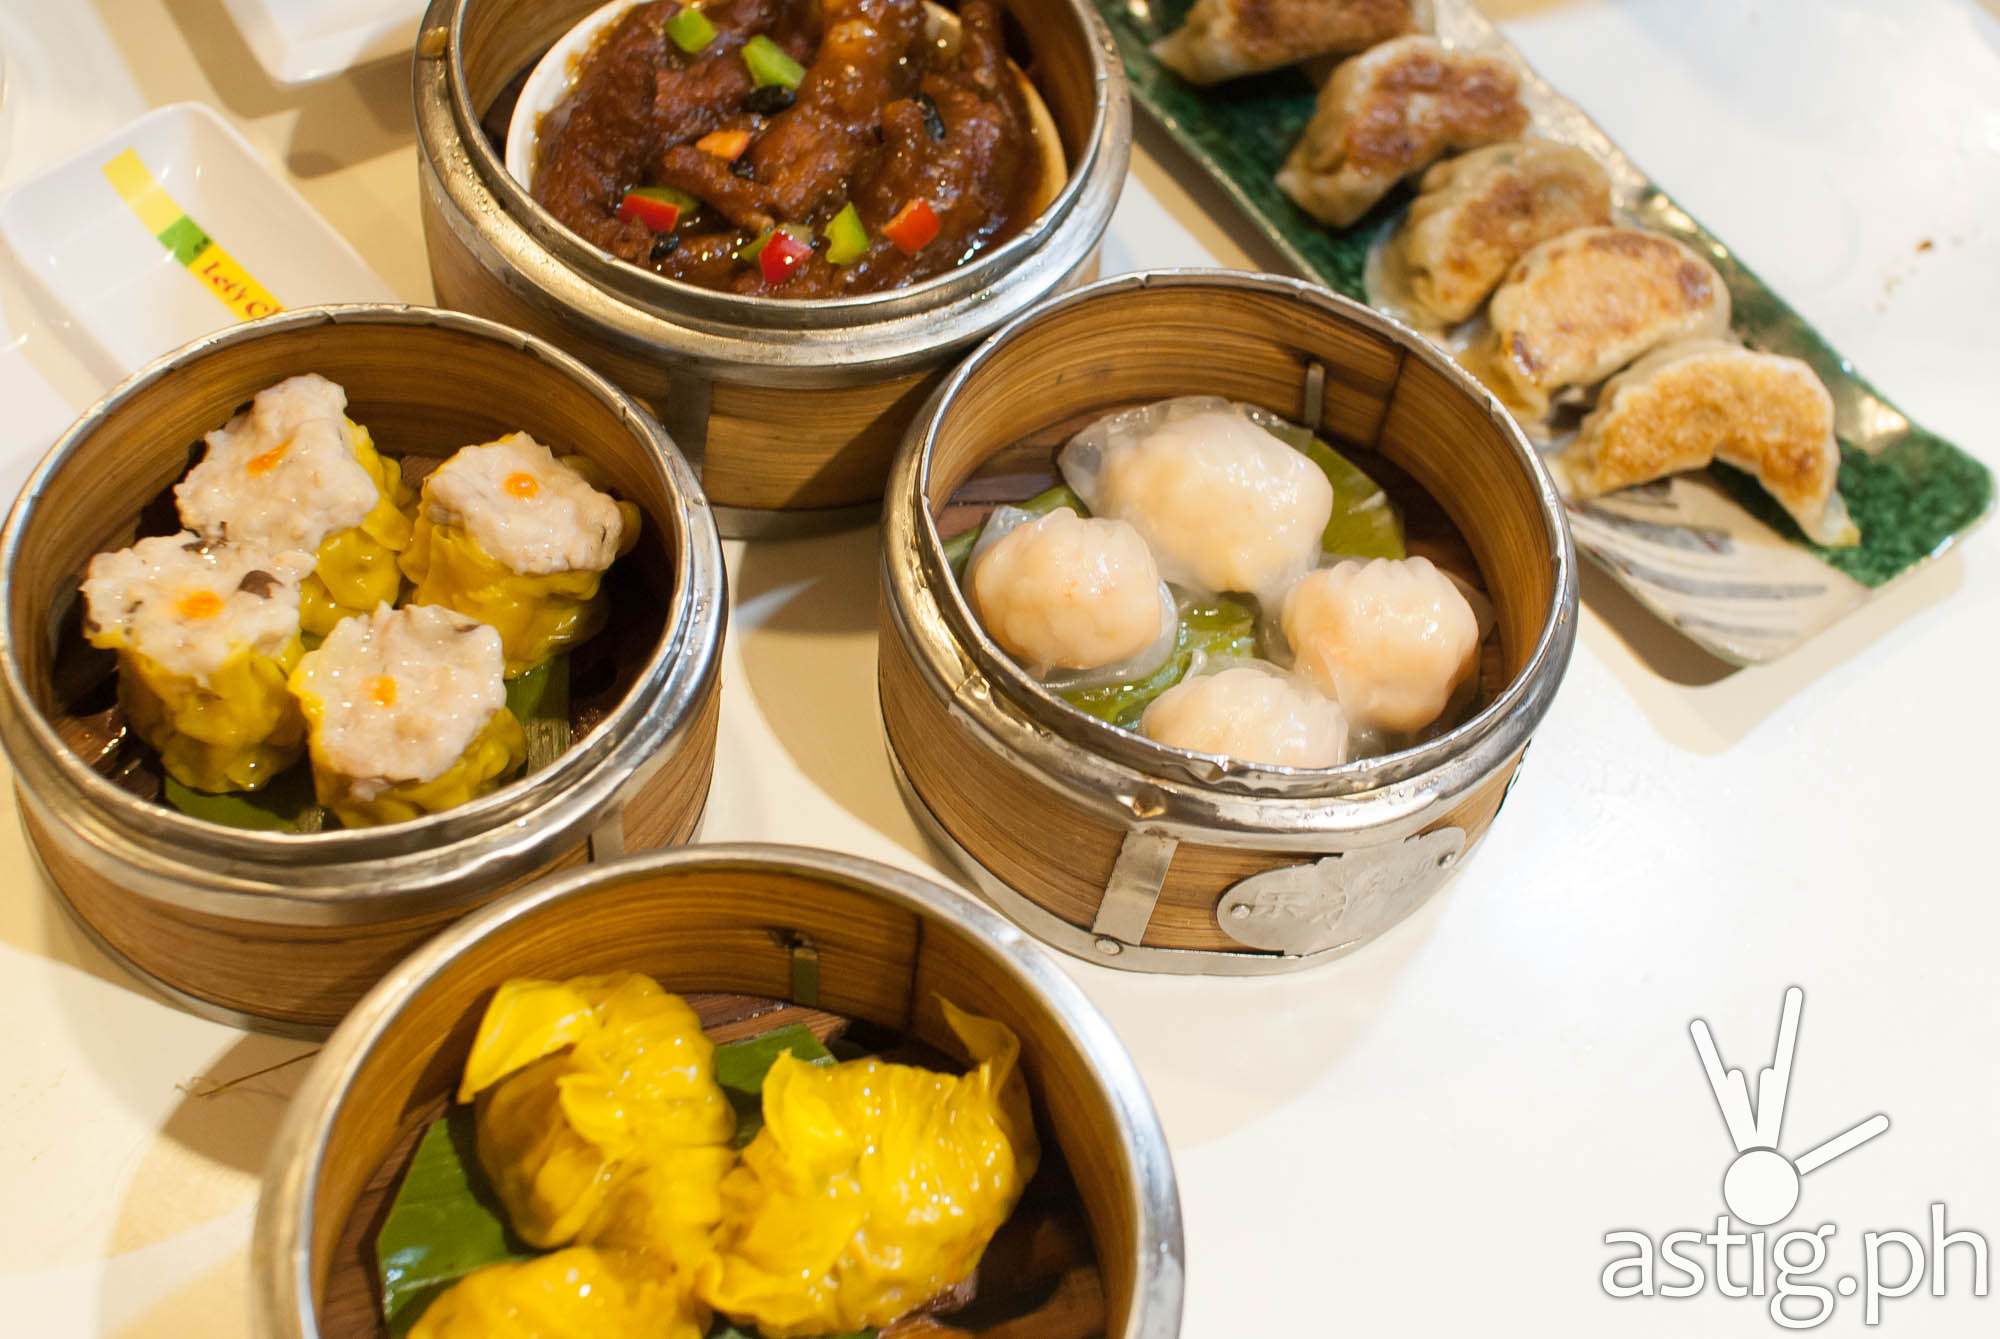 Chinese dim sum and Japanese dumplings - Let's Chow Rice and Noodle